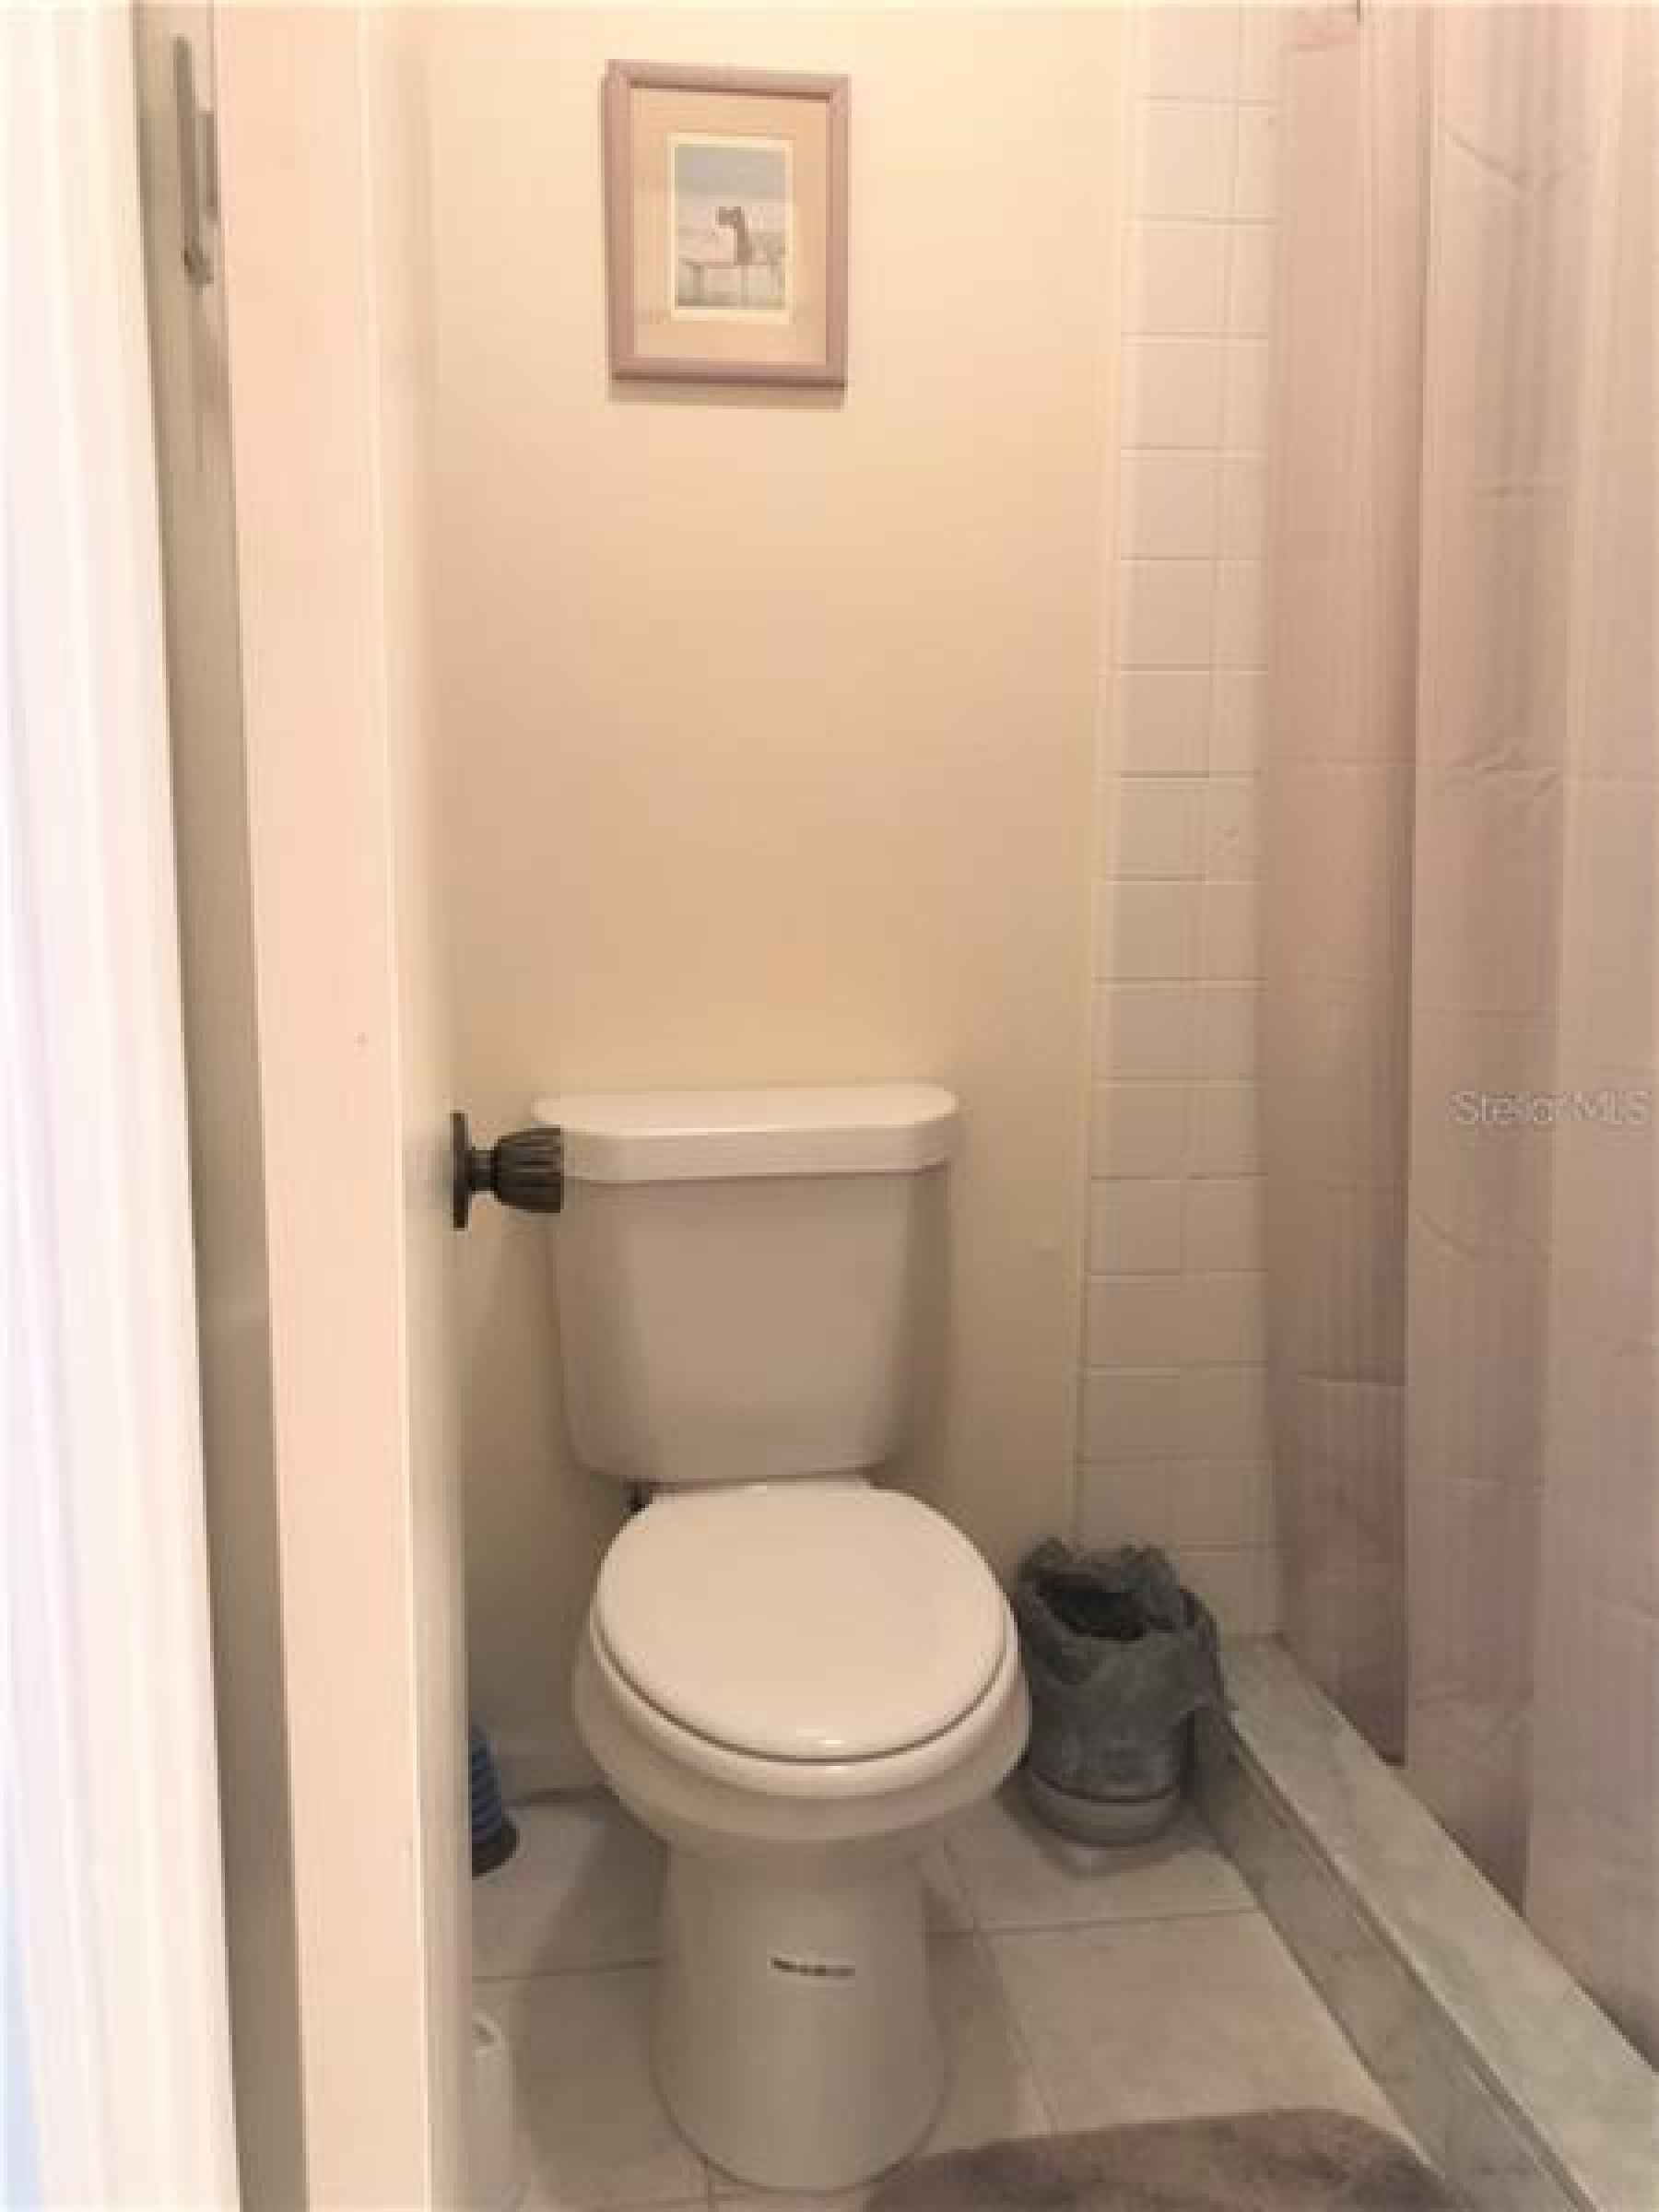 Master bathroom has a standup shower and toilet is in a room by itself